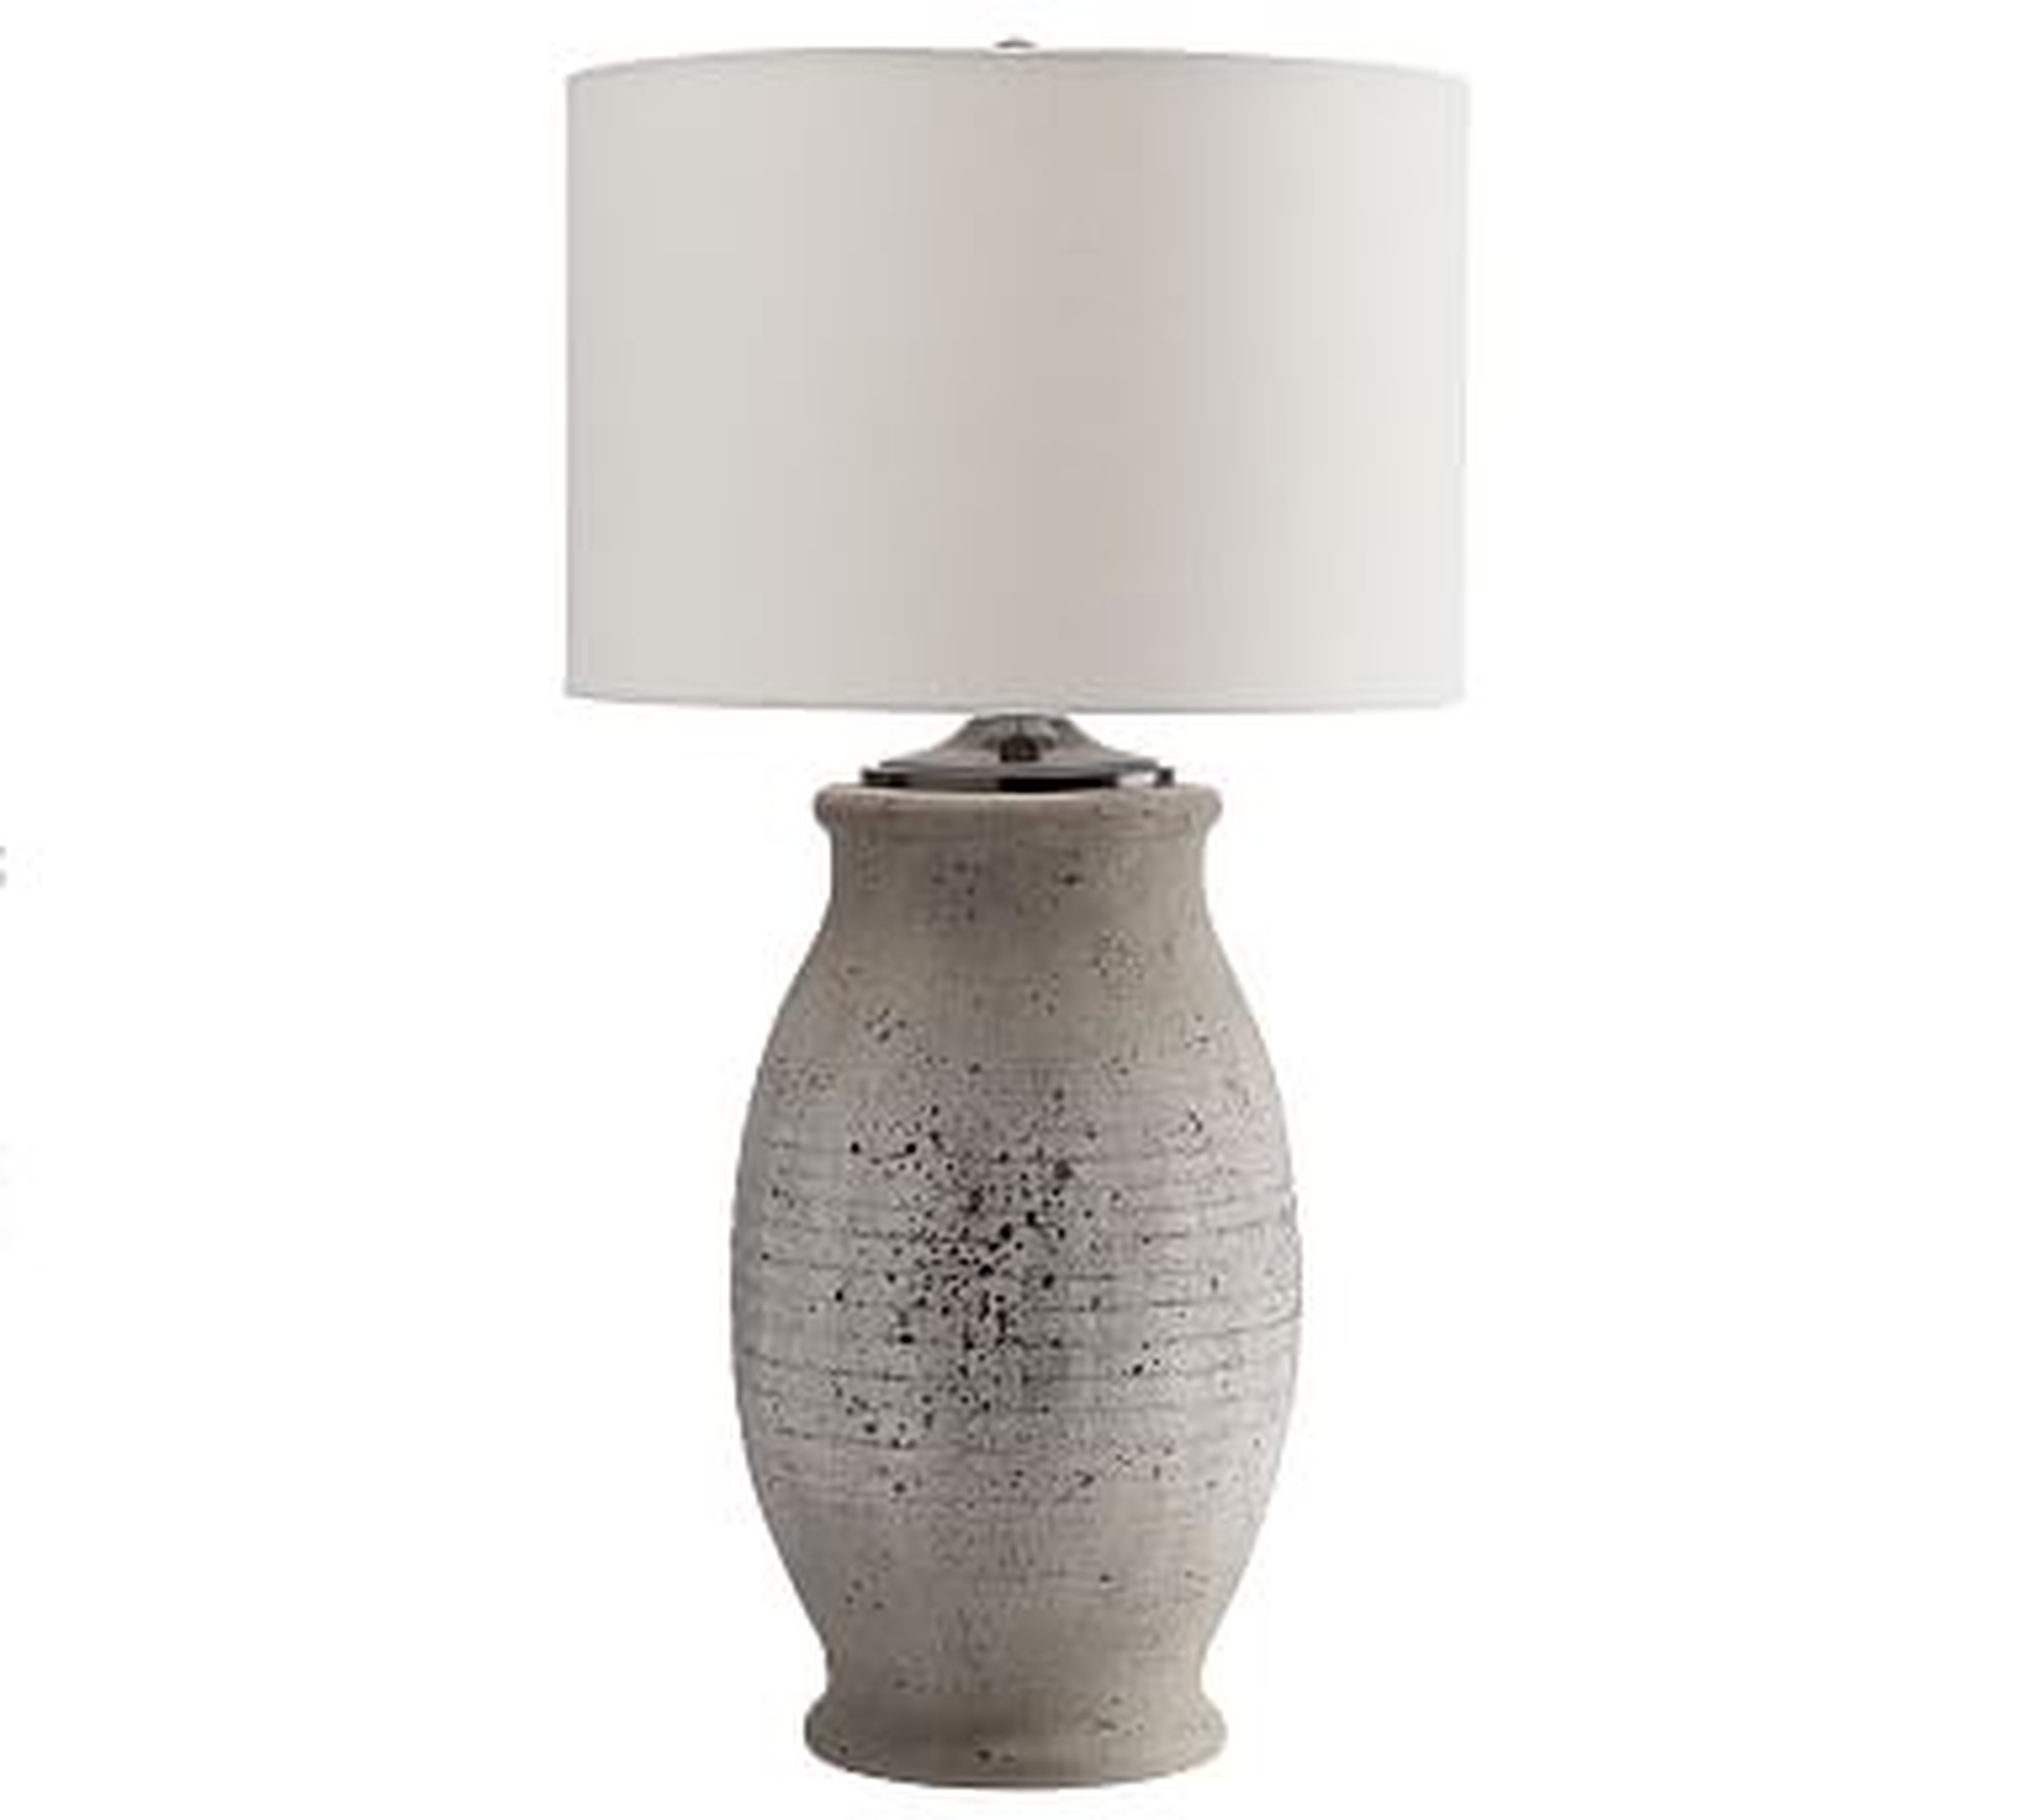 Maddox Terra Cotta 27" Table Lamp, Rustic Gray Base With Medium Gallery Stright-Sided Drum Shade, White - Pottery Barn